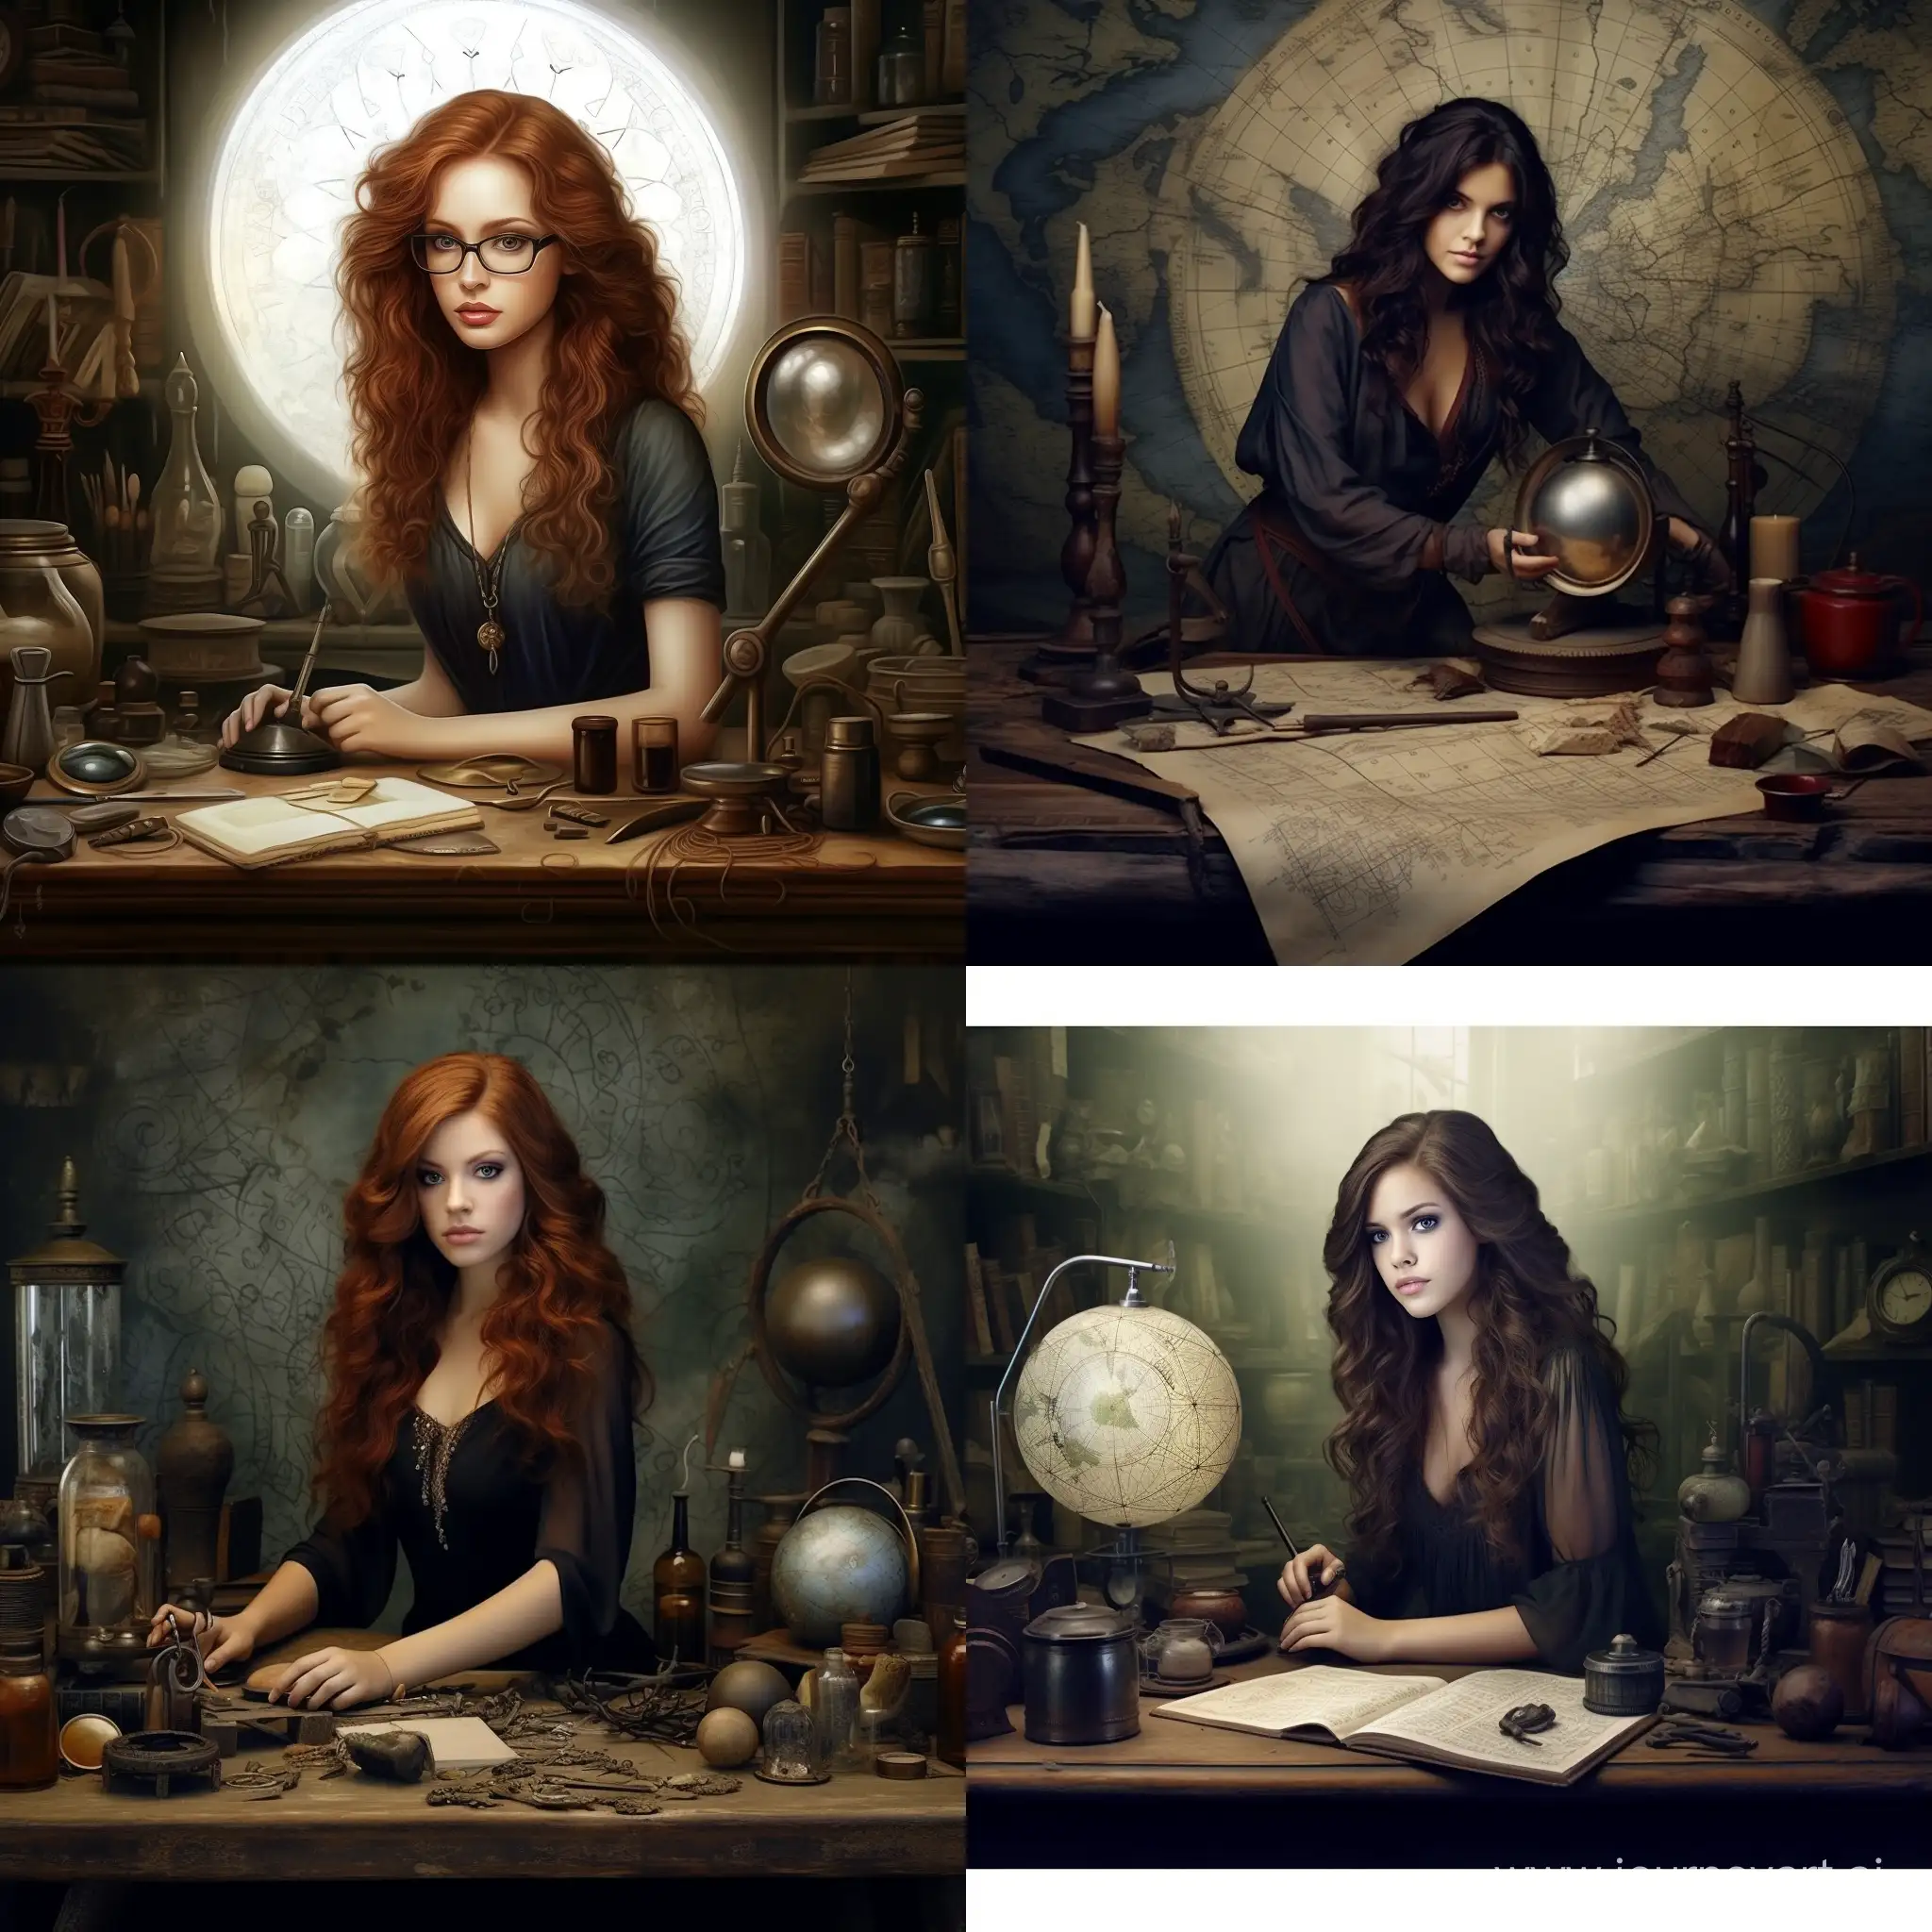 Woman-Tarot-Reader-with-Realistic-Beauty-in-11-Aspect-Ratio